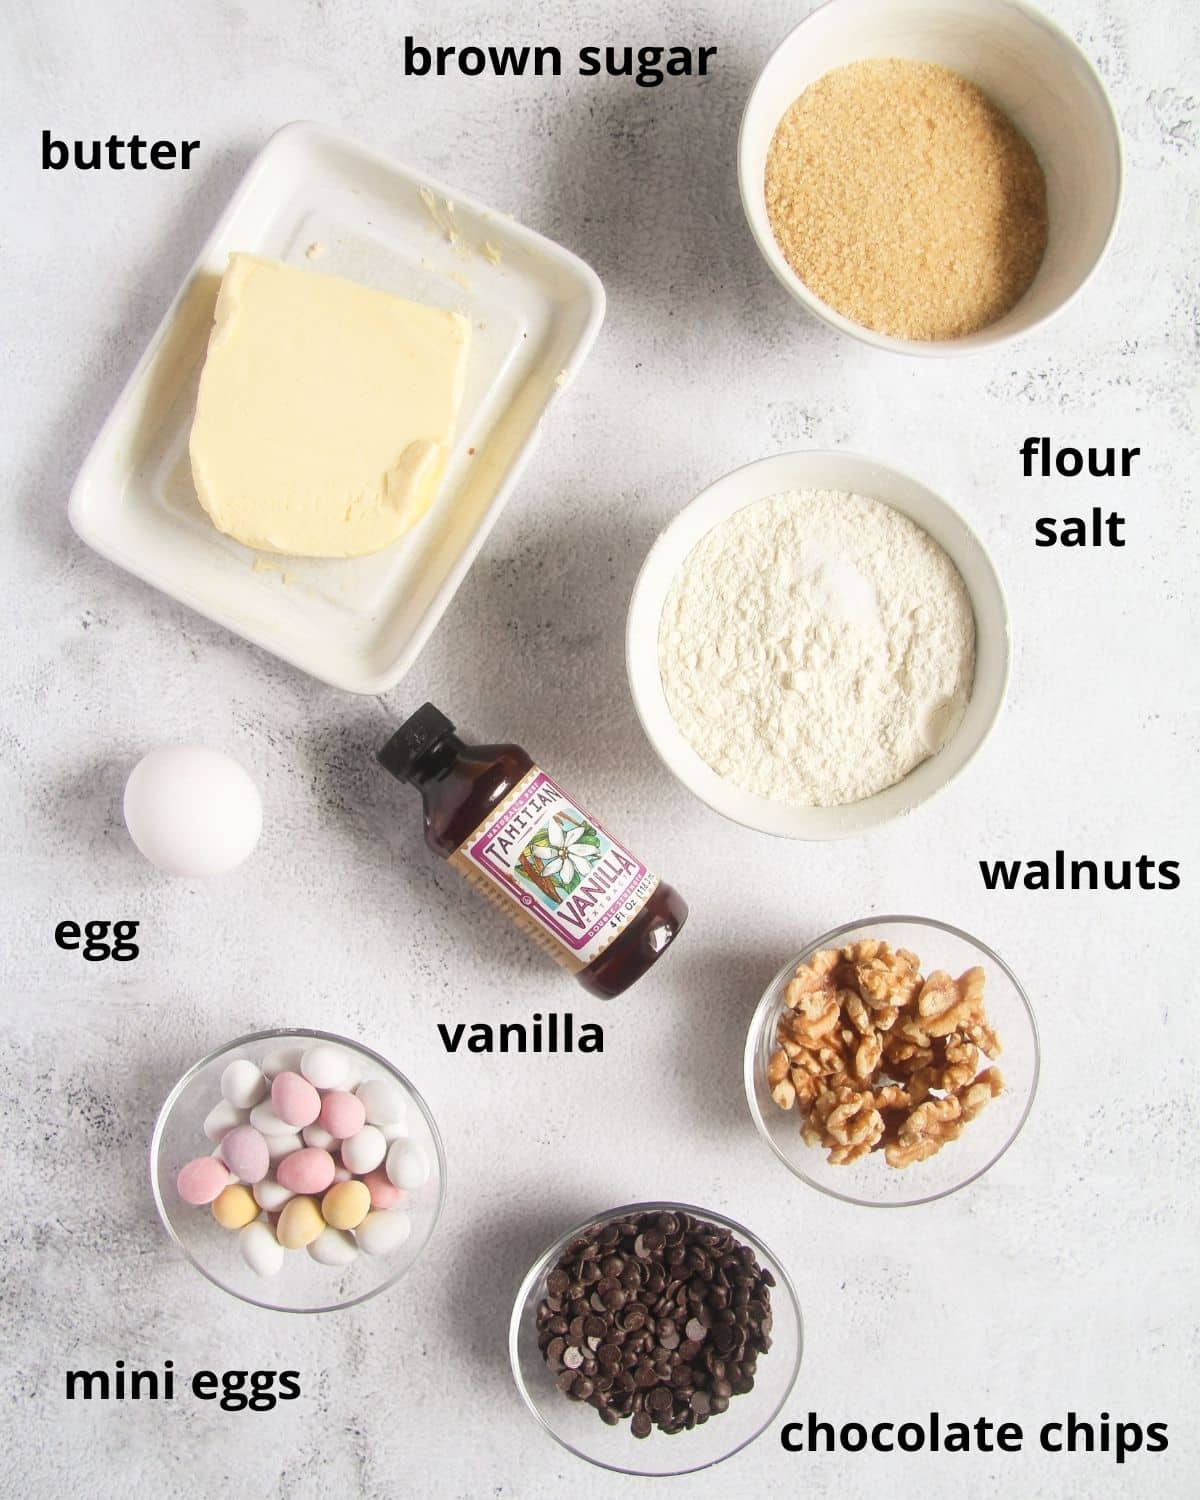 listed ingredients for making cookie bars with cadbury eggs and chocolate chips.